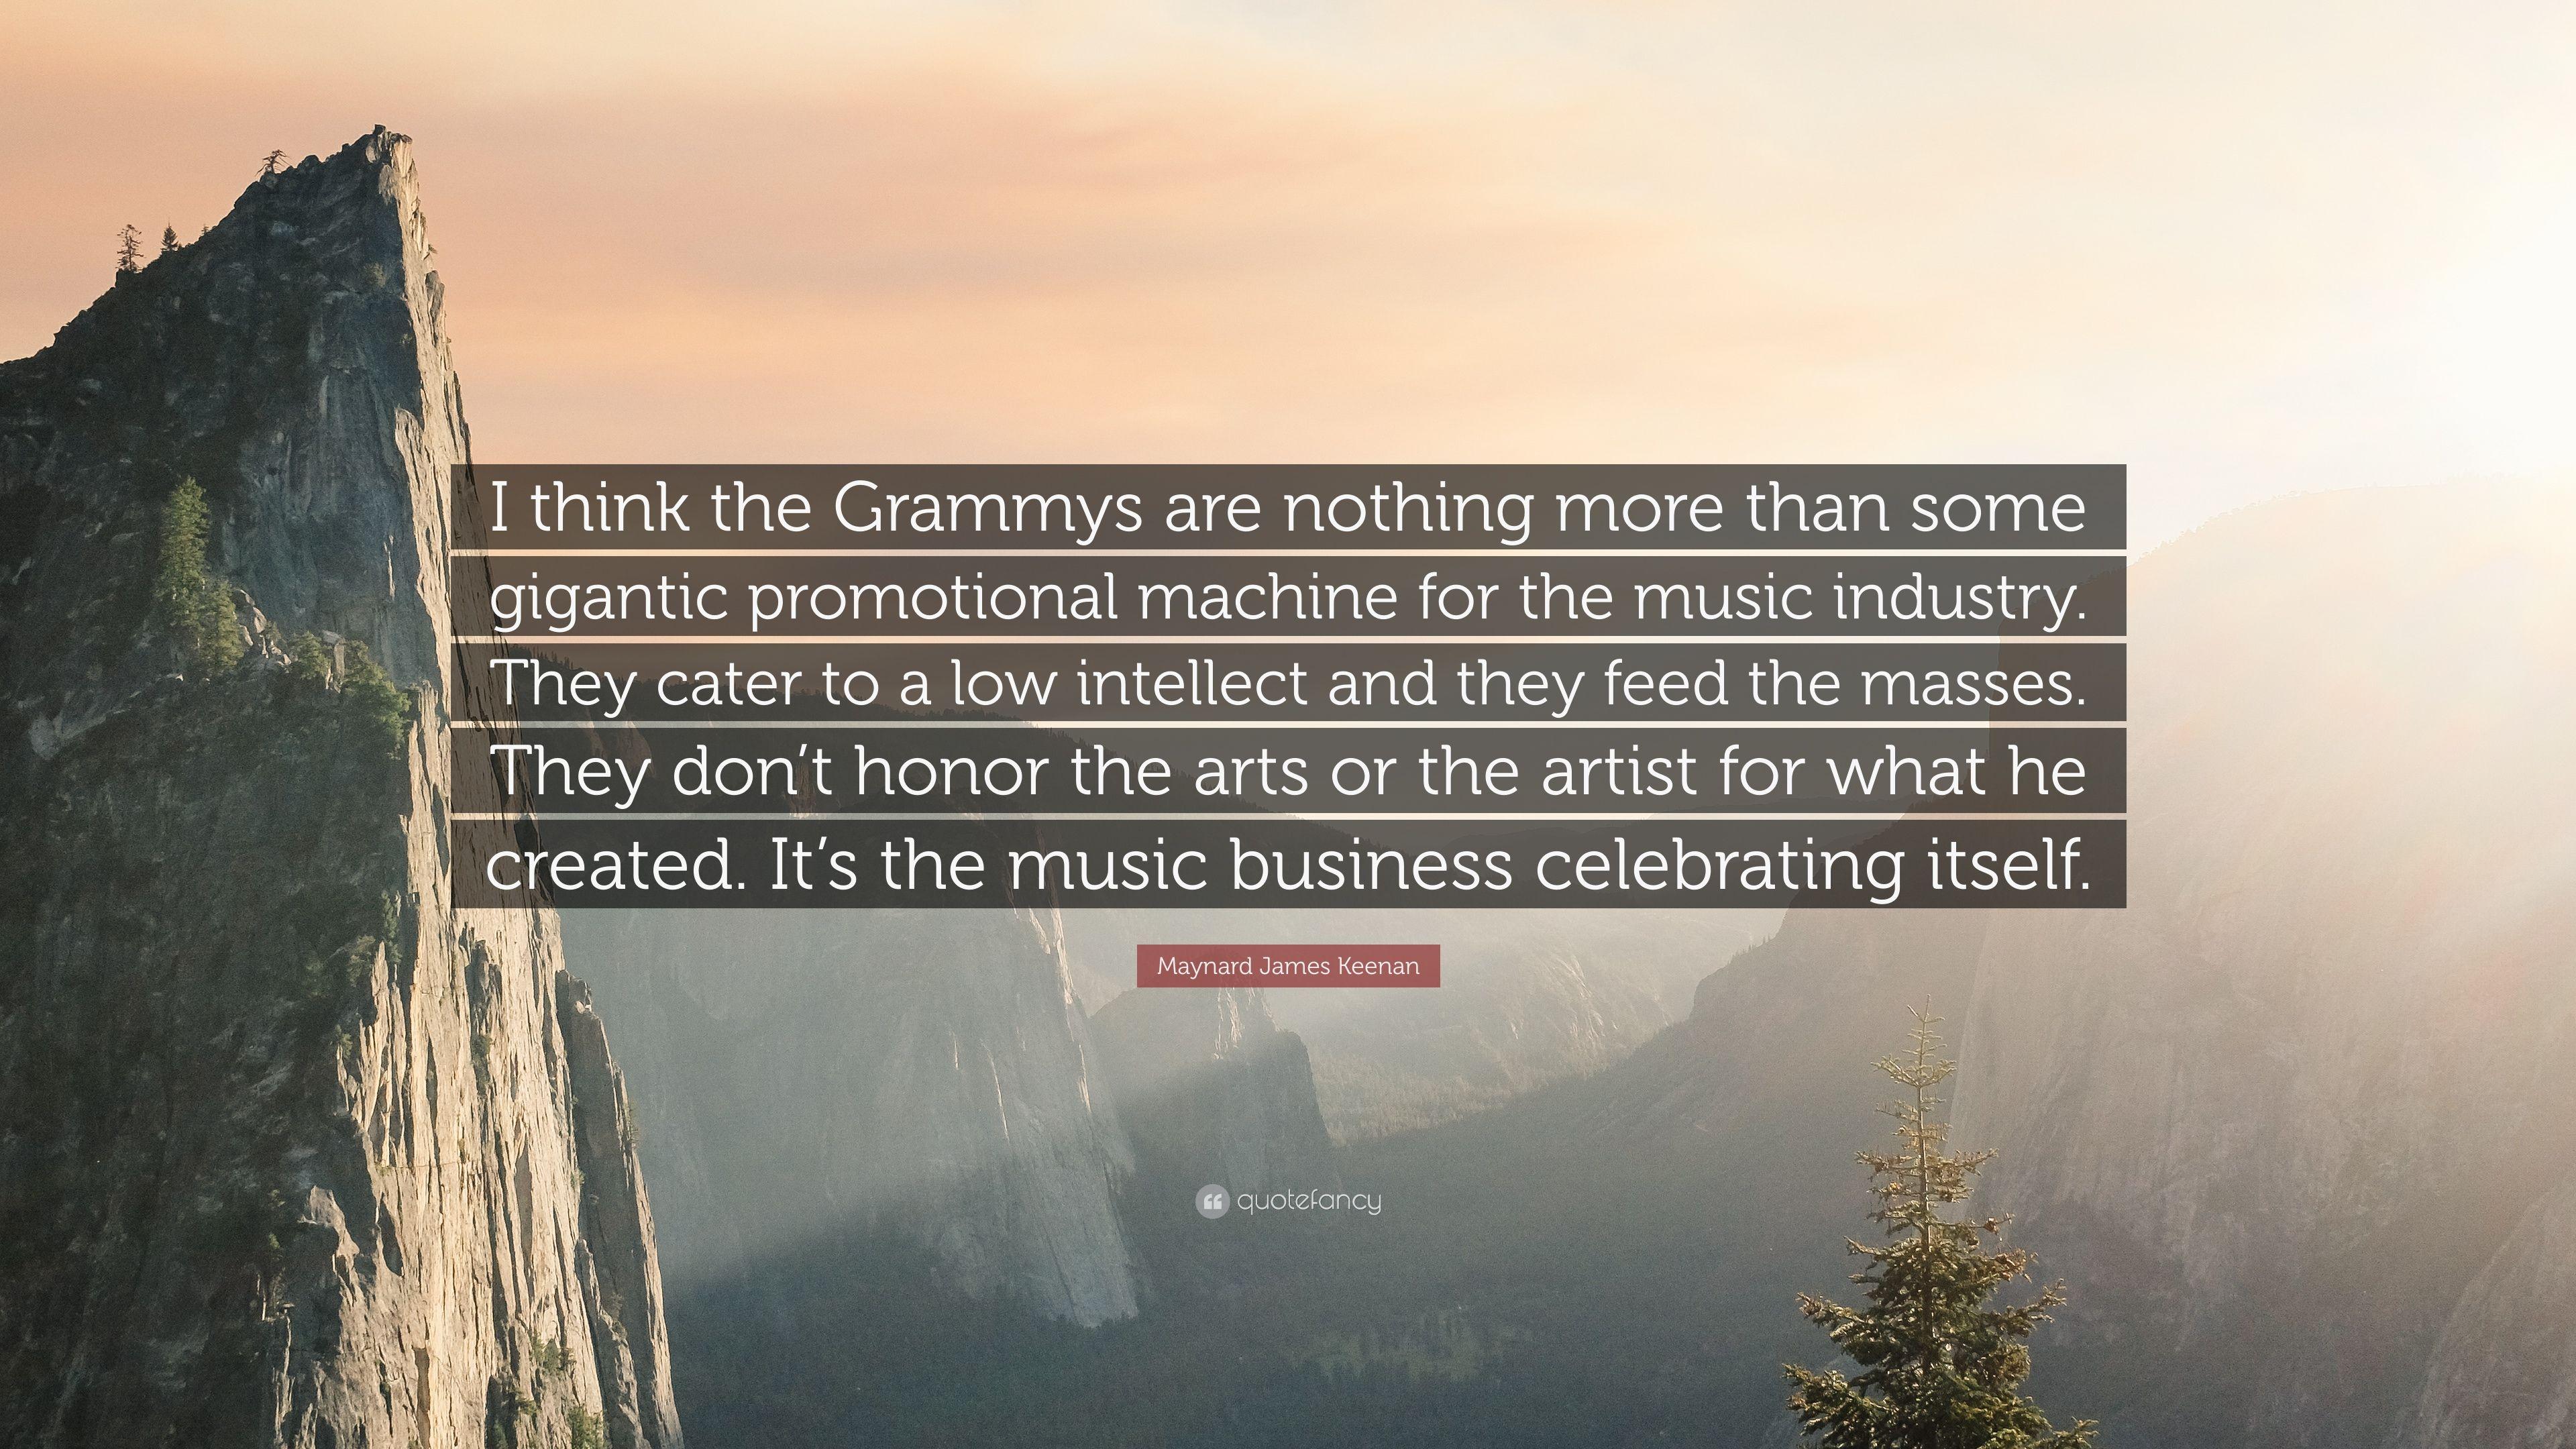 Maynard James Keenan Quote: “I think the Grammys are nothing more